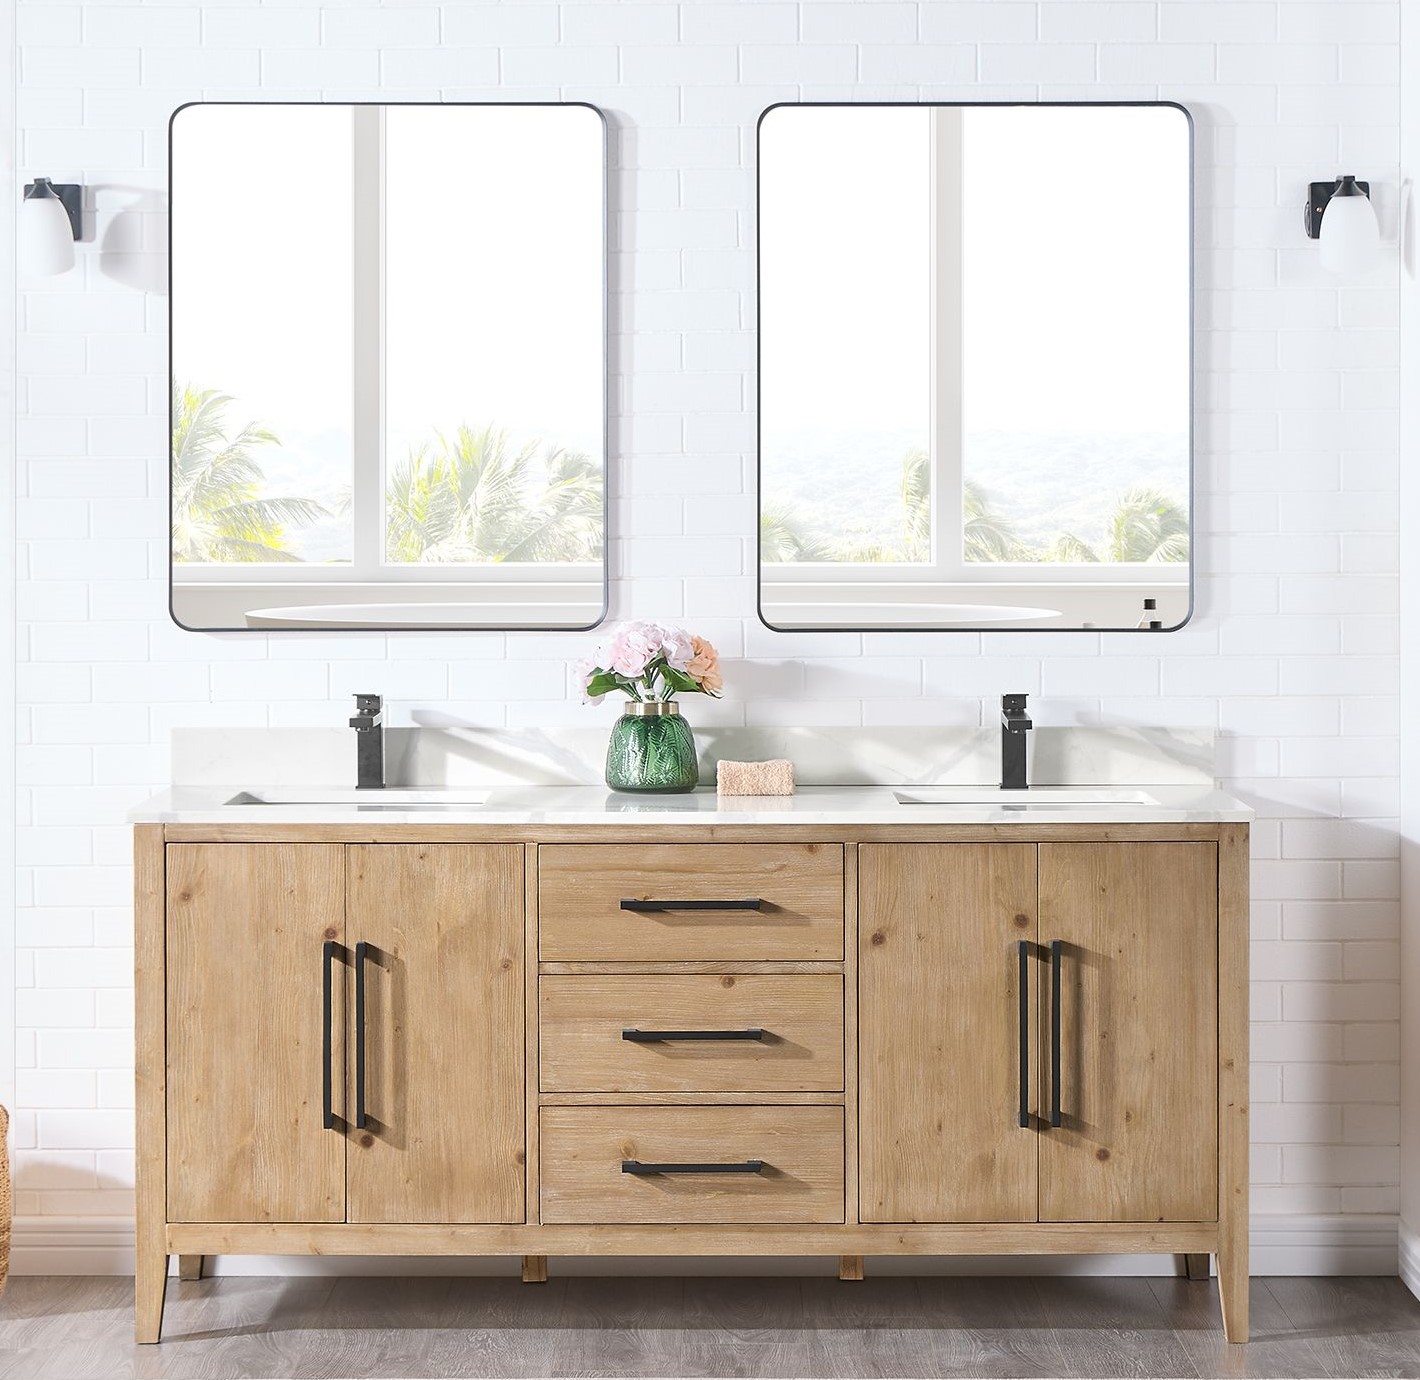 Issac Edwards 72" Double Bathroom Vanity in Weathered Fir with Calacatta White Quartz Stone Countertop